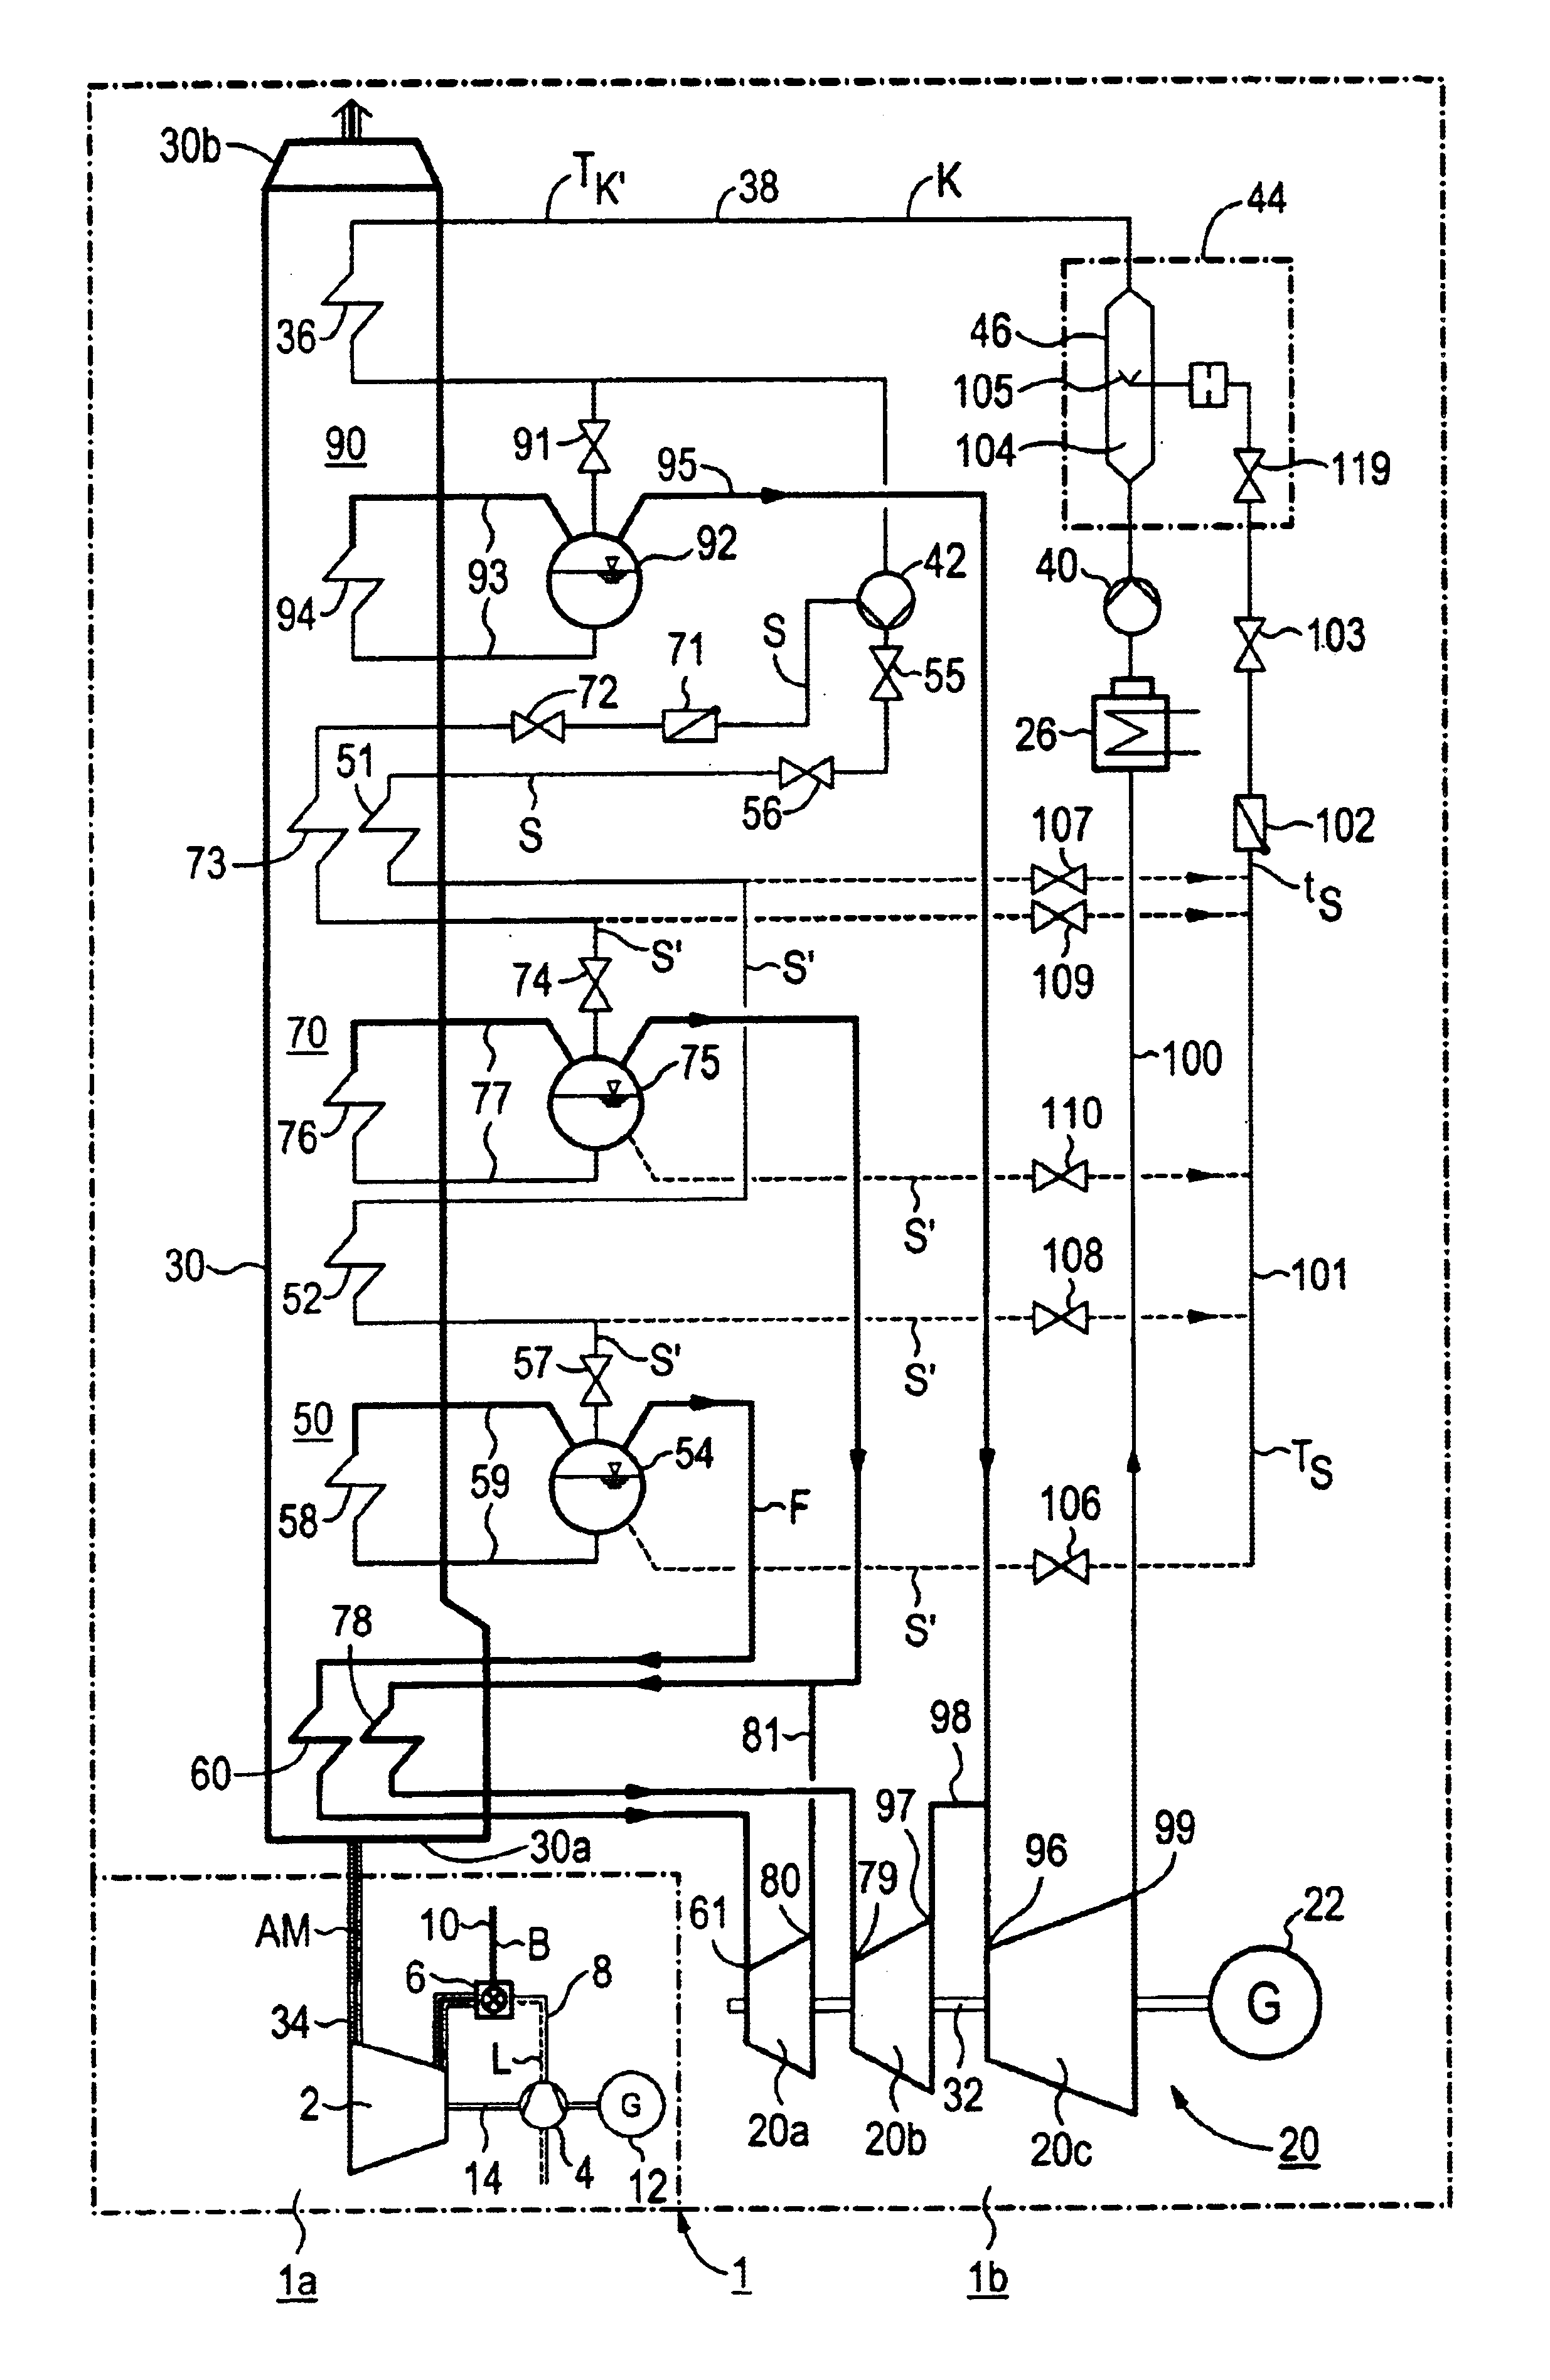 Method for operating a gas and steam turbine system and a corresponding system